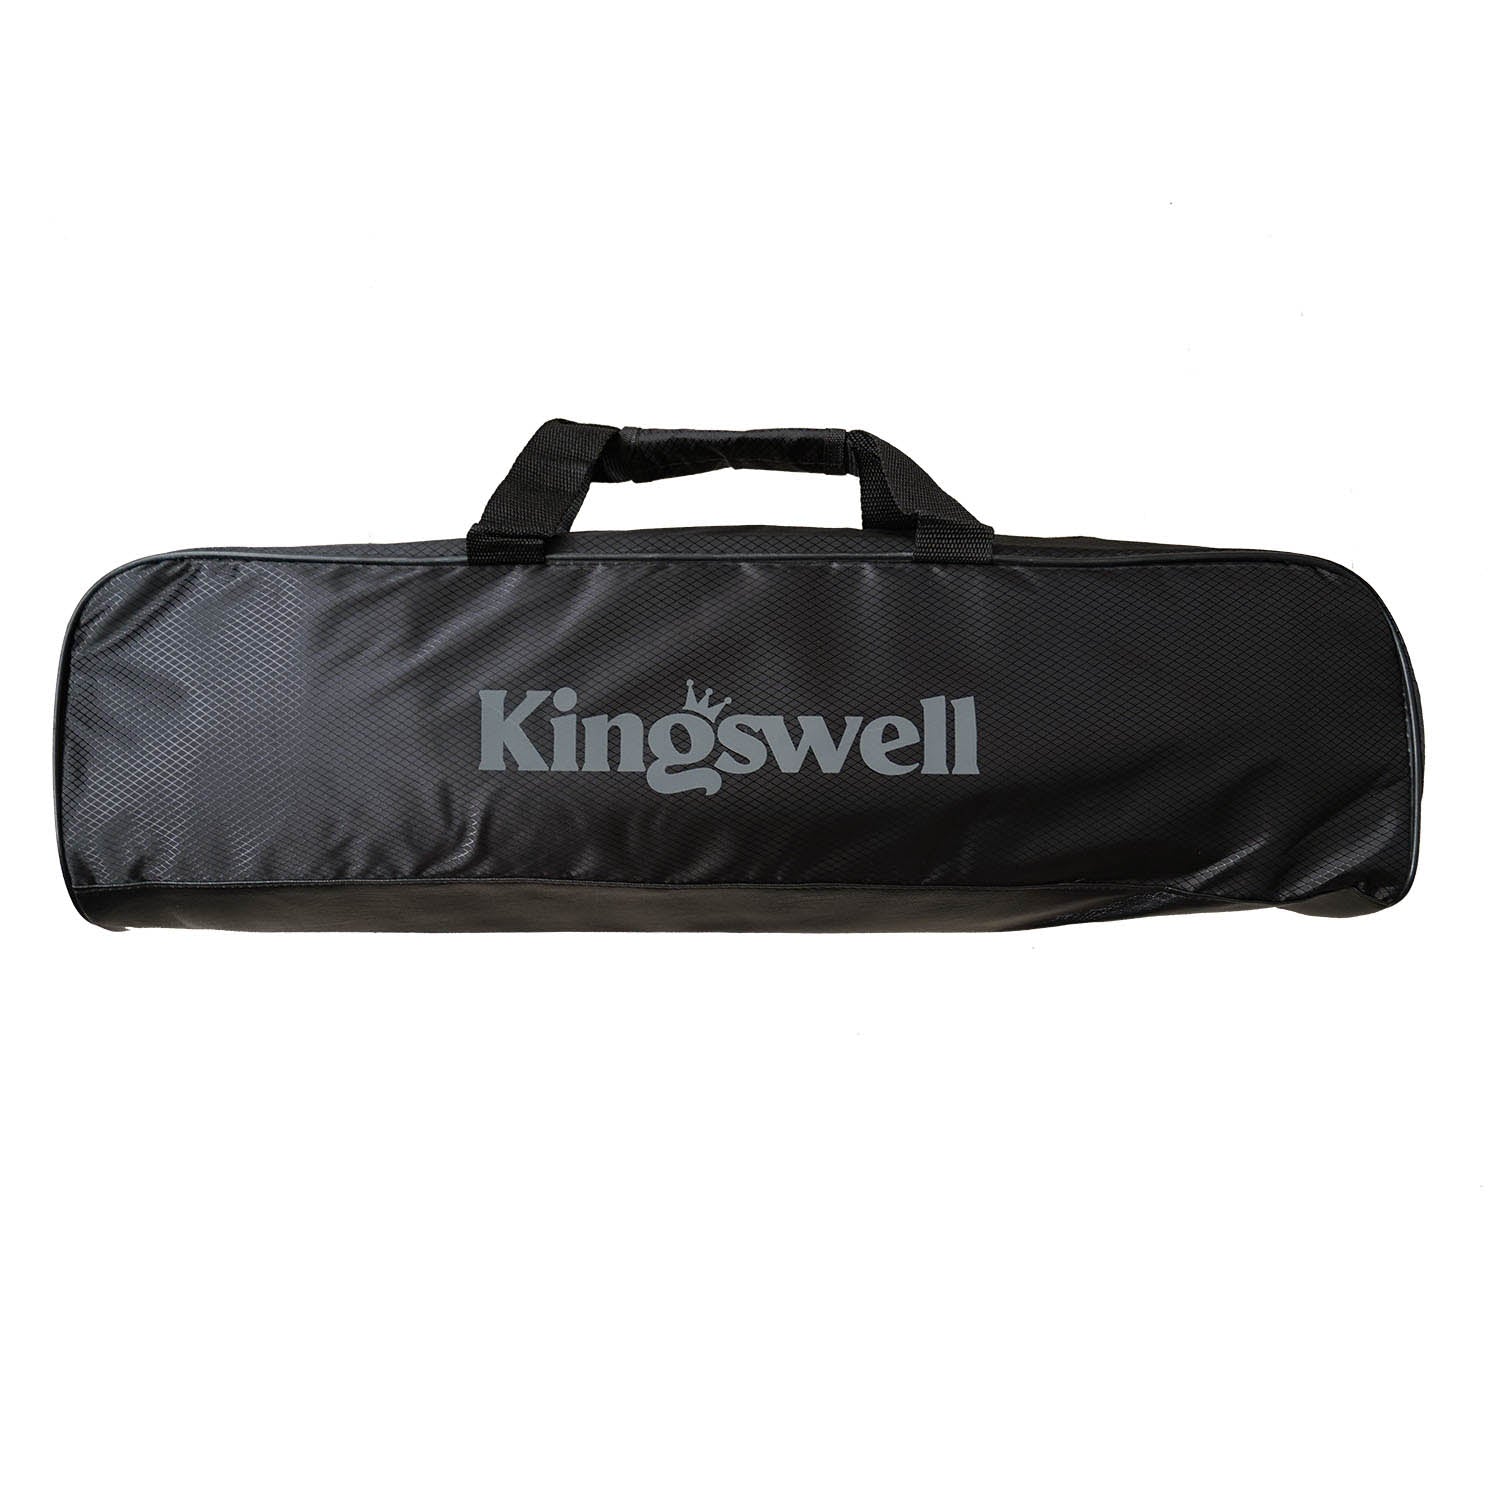 Kingswell Carrying Bag